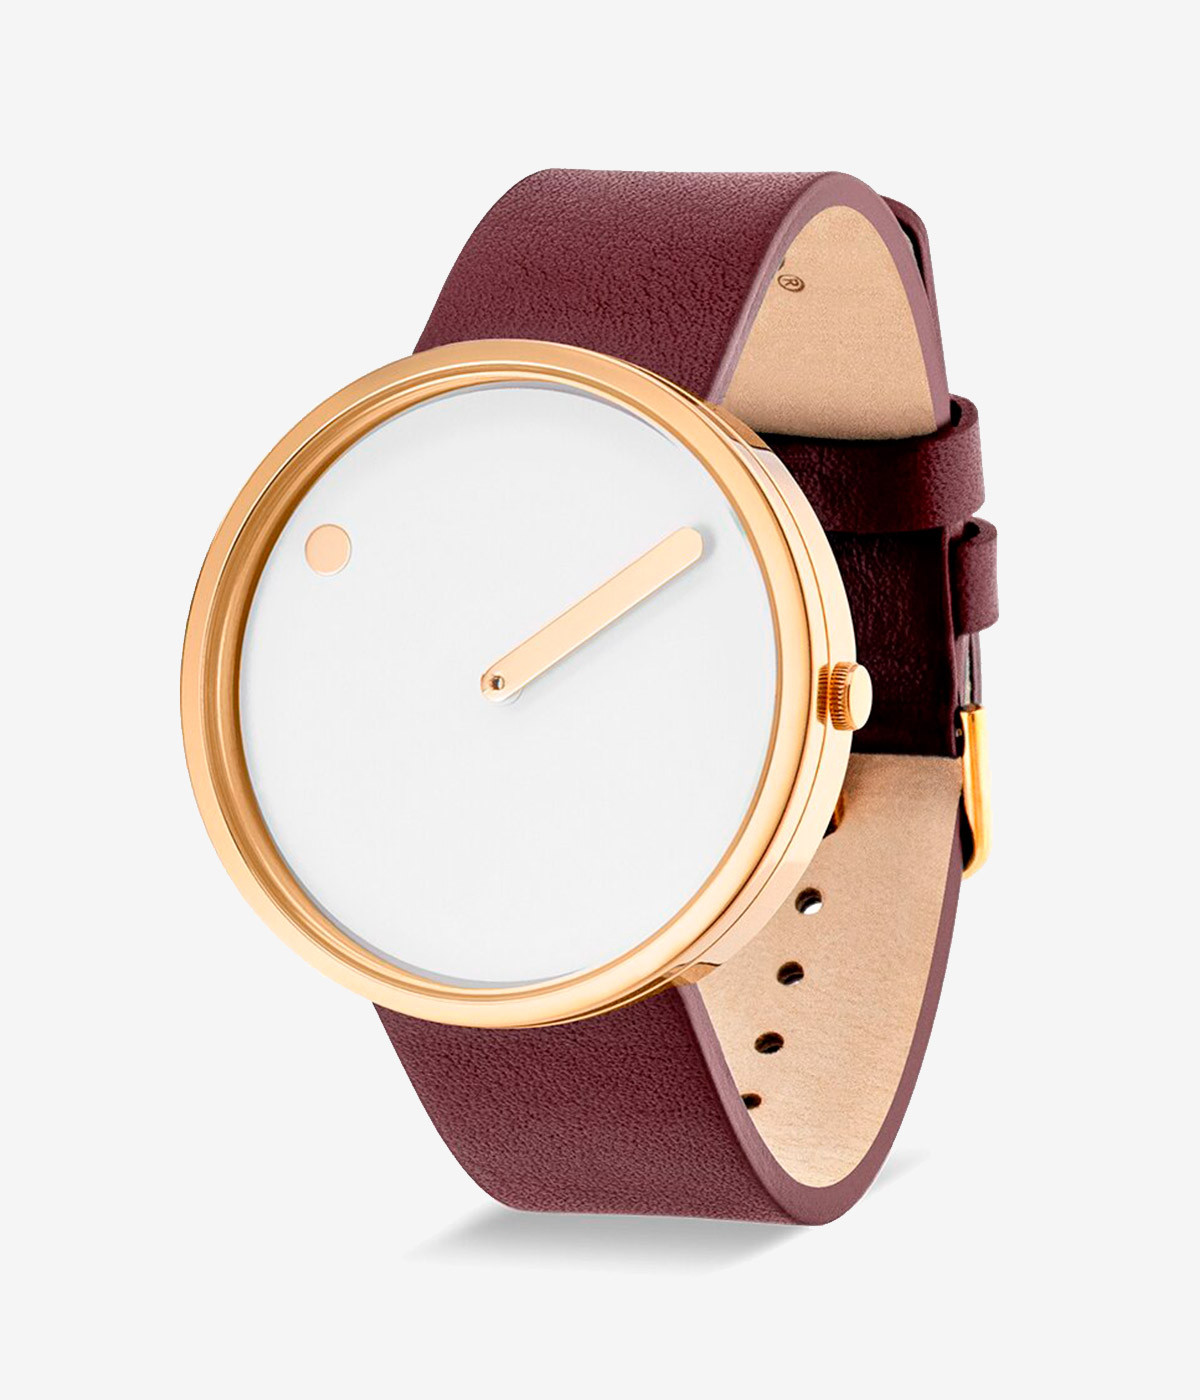 WHITE DIAL / BURGUNDY LEATHER STRAP 40 mm